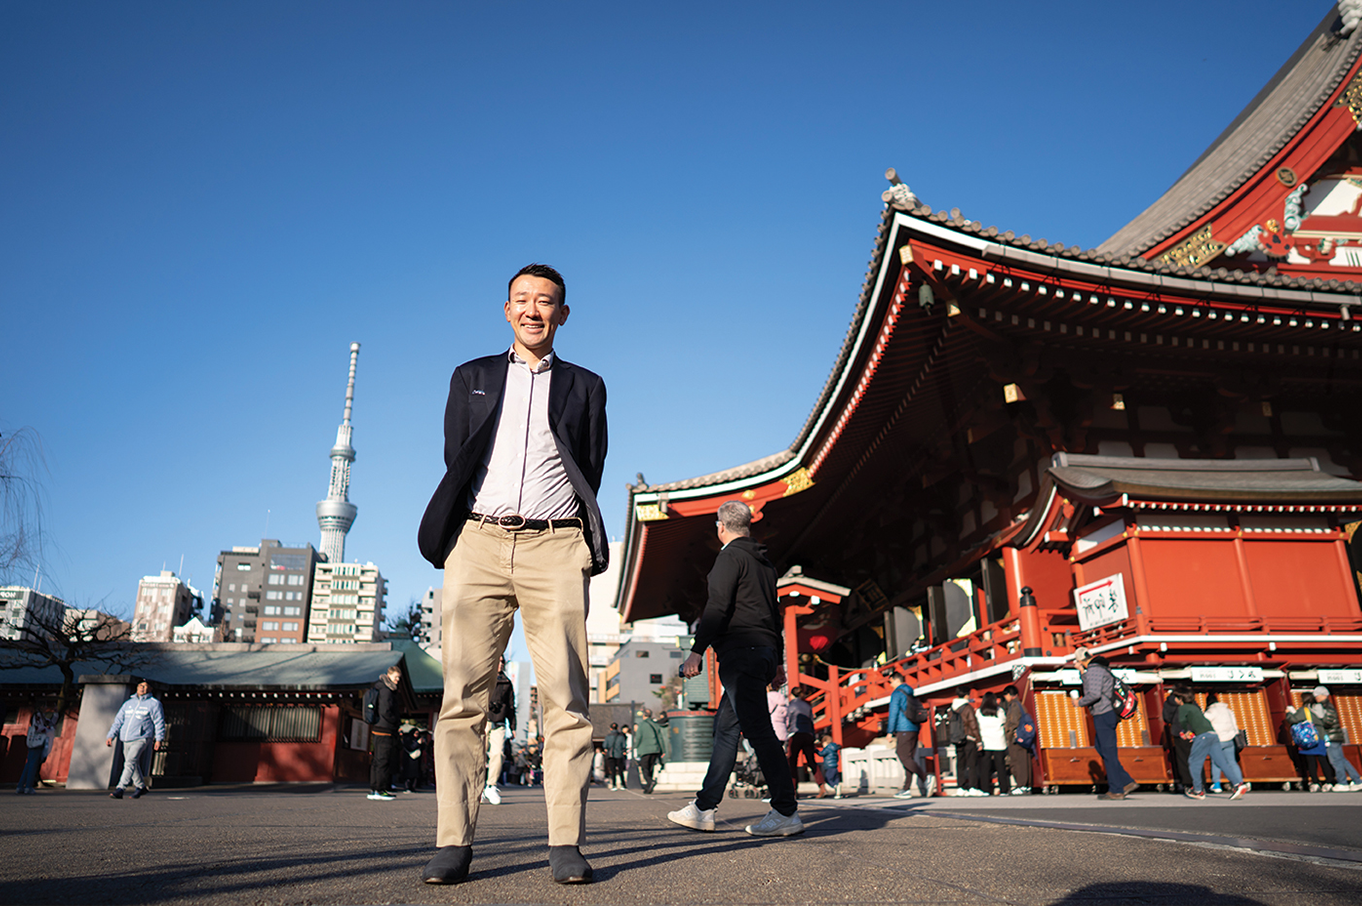 Maison ROCOCO Corporation Founder and CEO Yohay Wakabayashi poses for a photograph in at Sensoji Temple on Wednesday, 2月. 2023年28日，东京. (